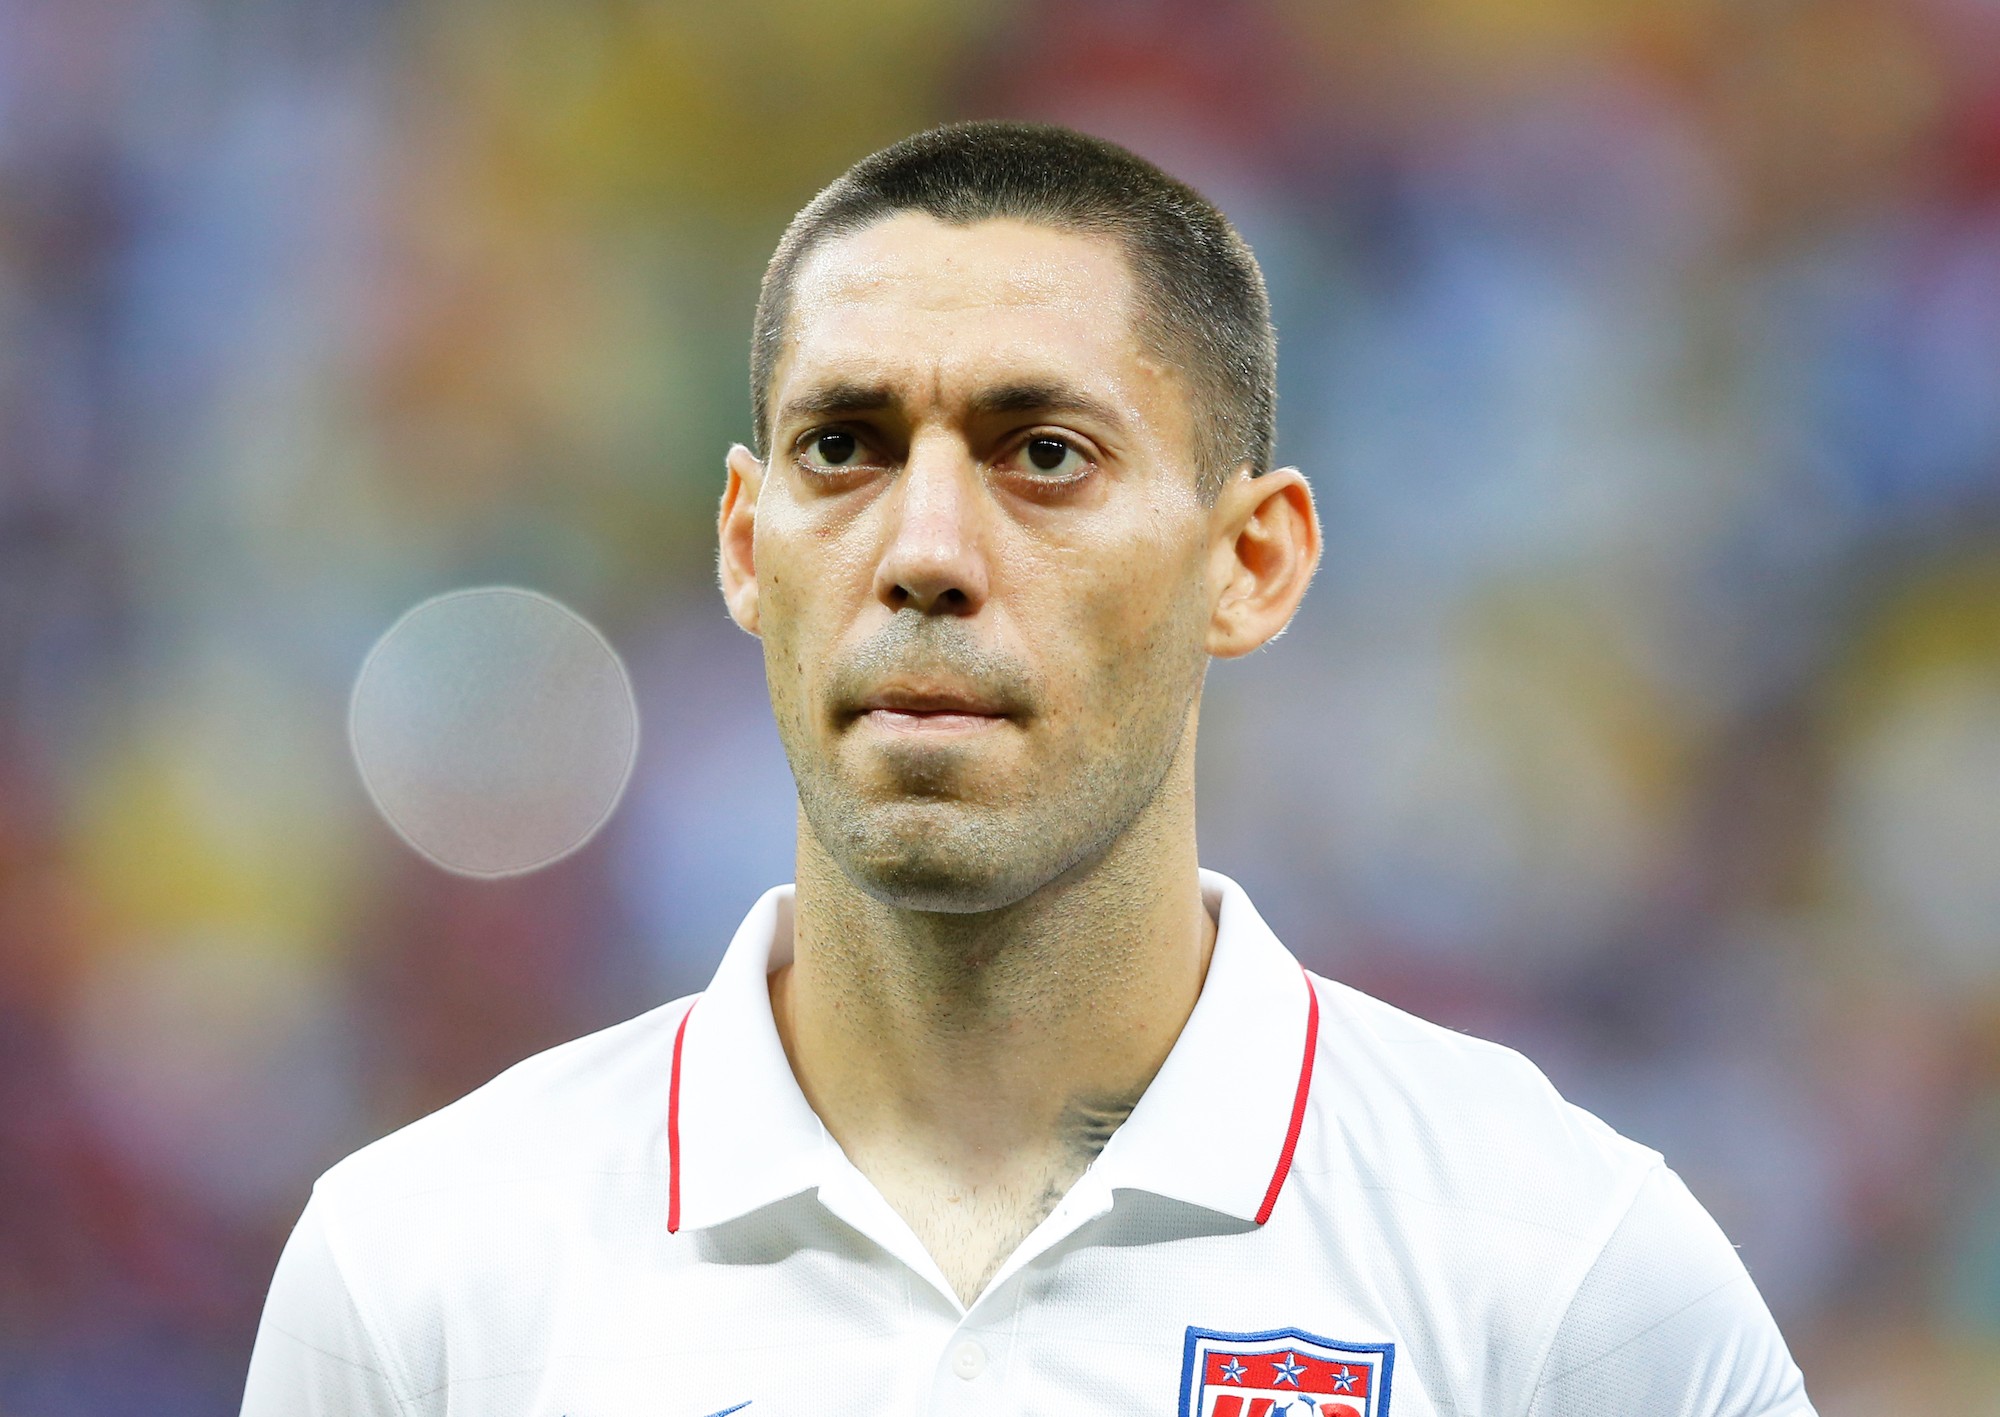 U.S. soccer star Clint Dempsey drives fast, with a fistful of